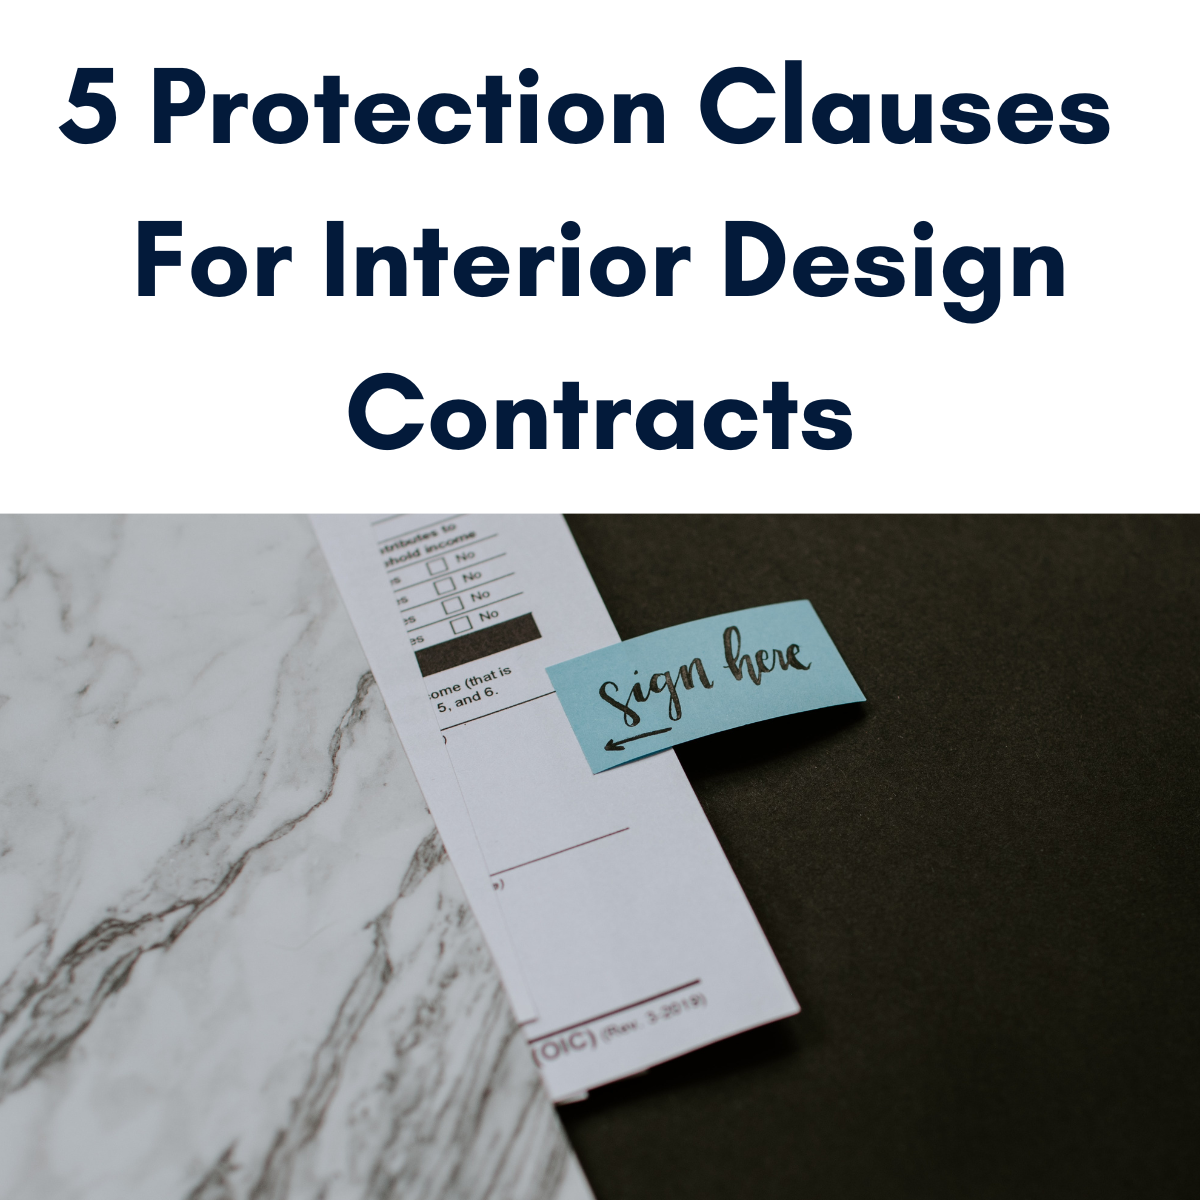 Protection Clauses for Interior Design